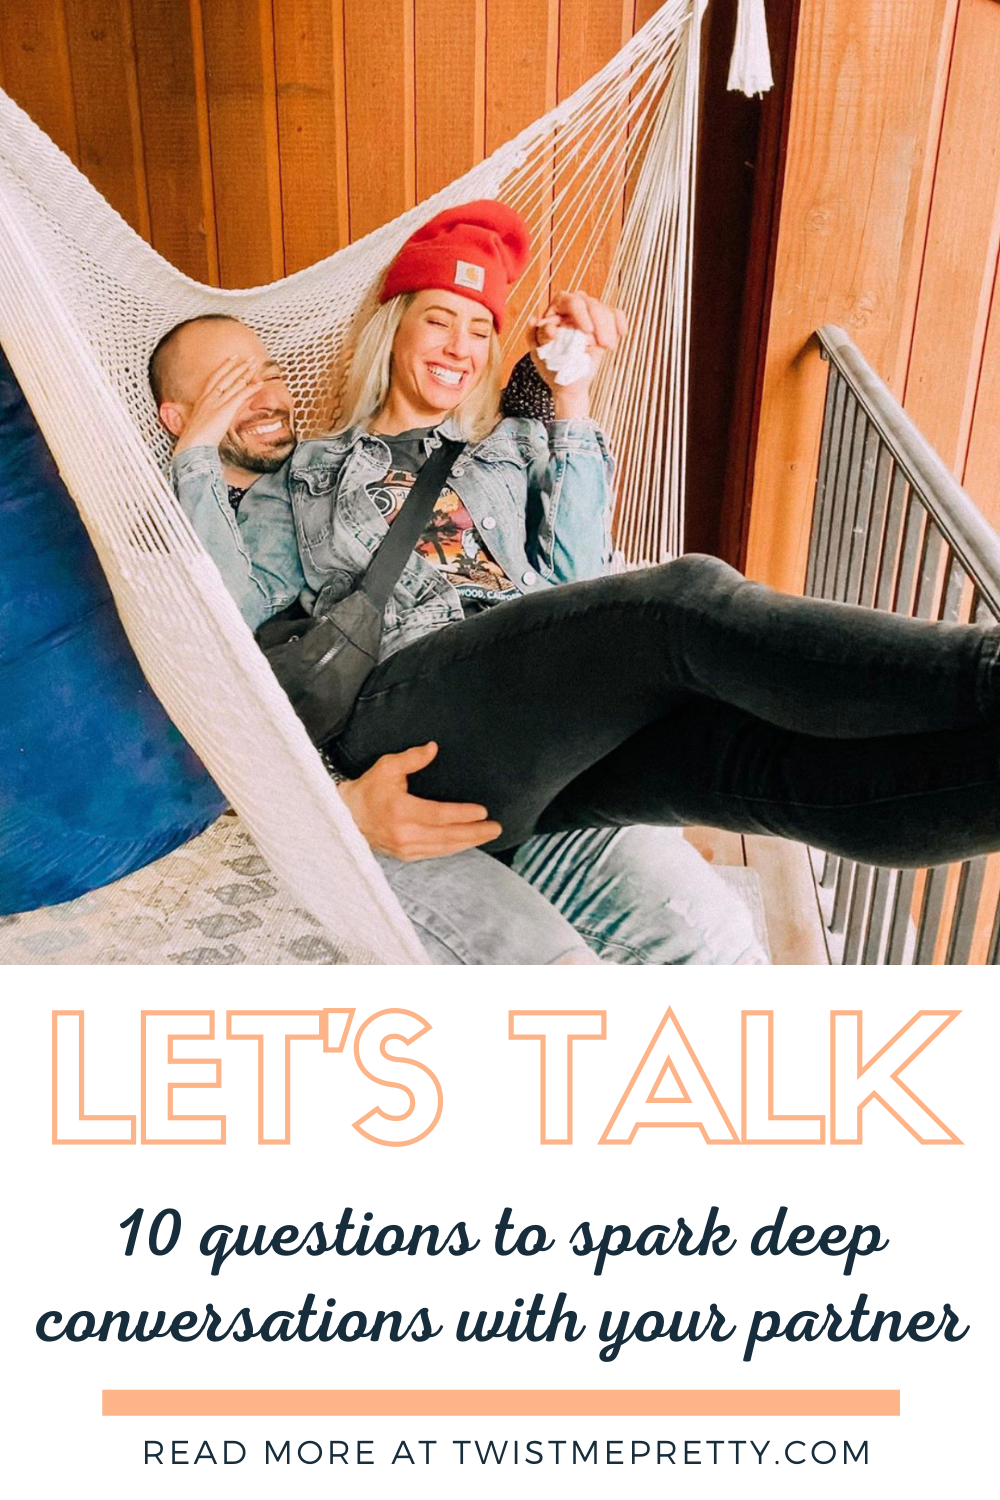 Let's Talk! 10 questions to spark deep conversations with your partner. www.twistmepretty.com